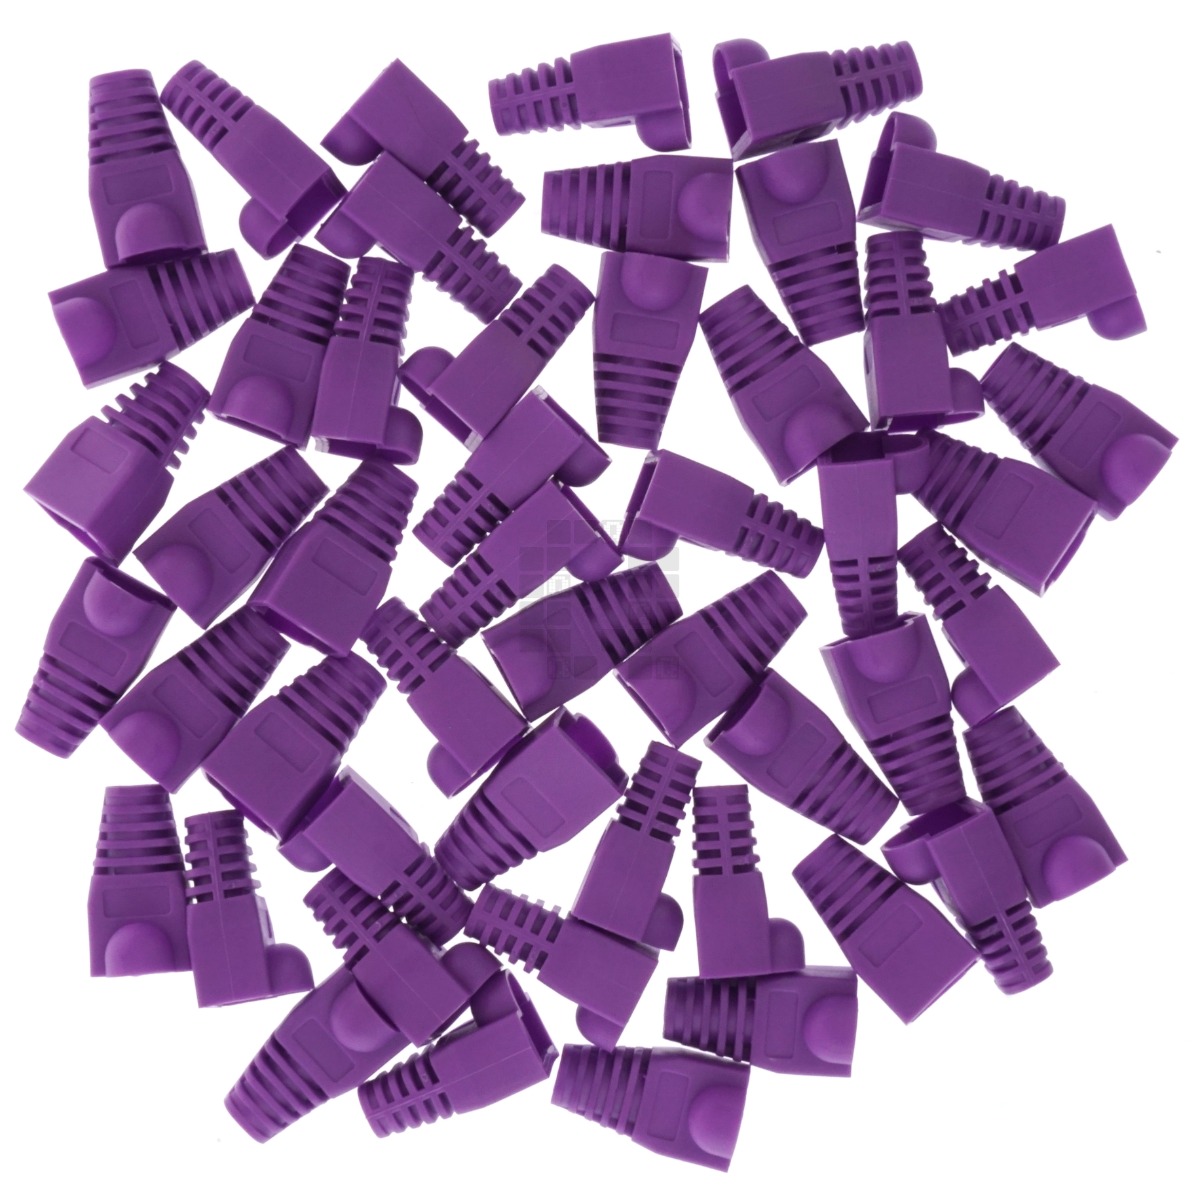 RJ-45 RJ45 Ethernet Strain Relief Boot Cover, Purple, for CAT5 CAT5E CAT6, 50 Pack